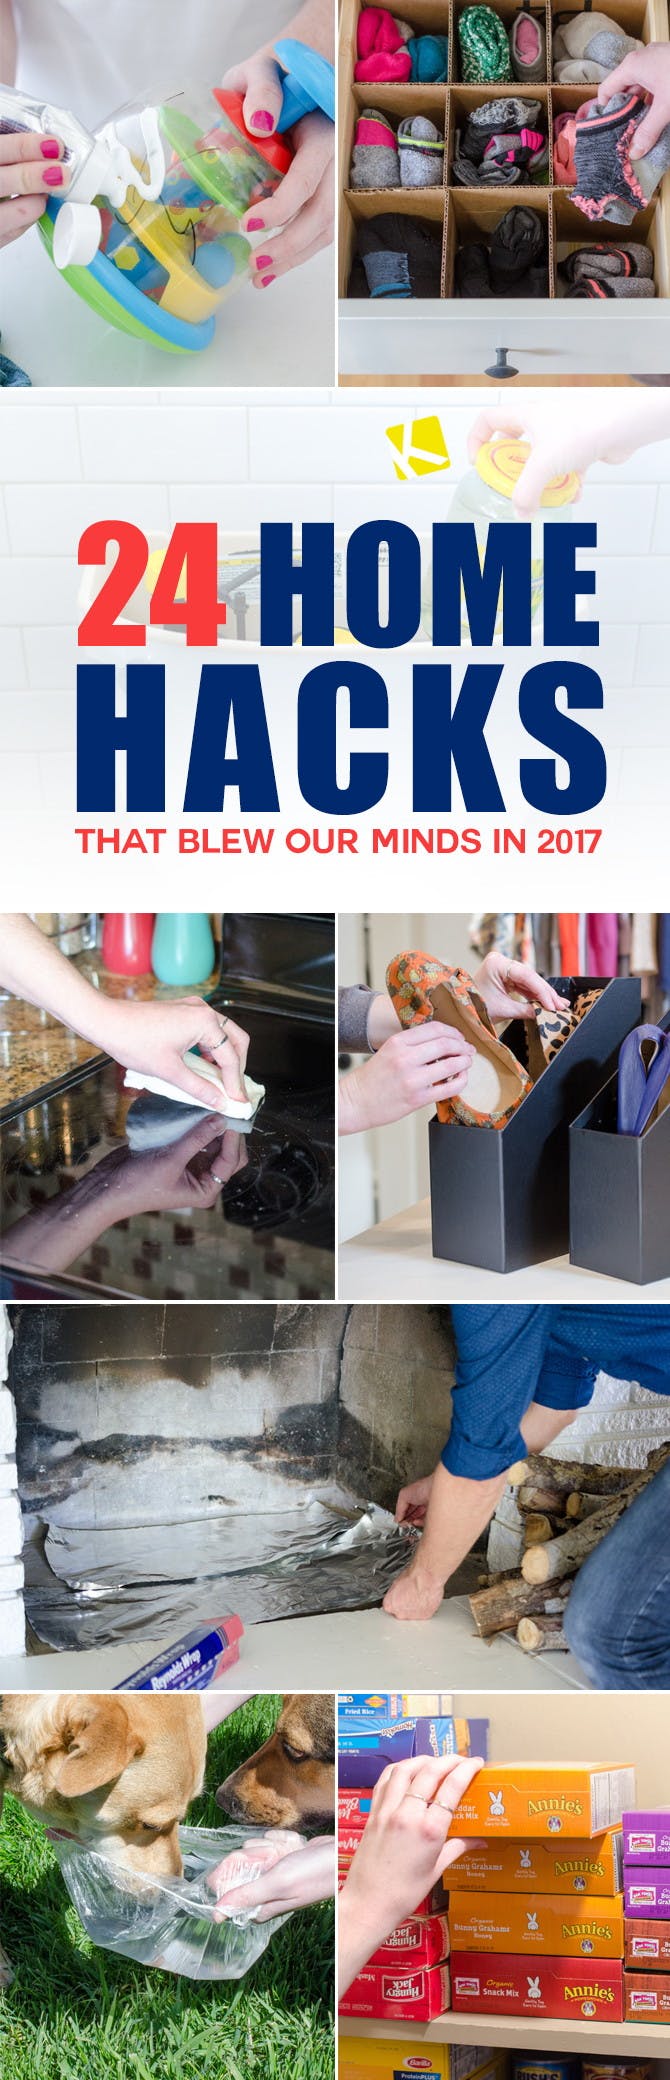 24 Home Hacks: Creative Solutions for Everyday Living